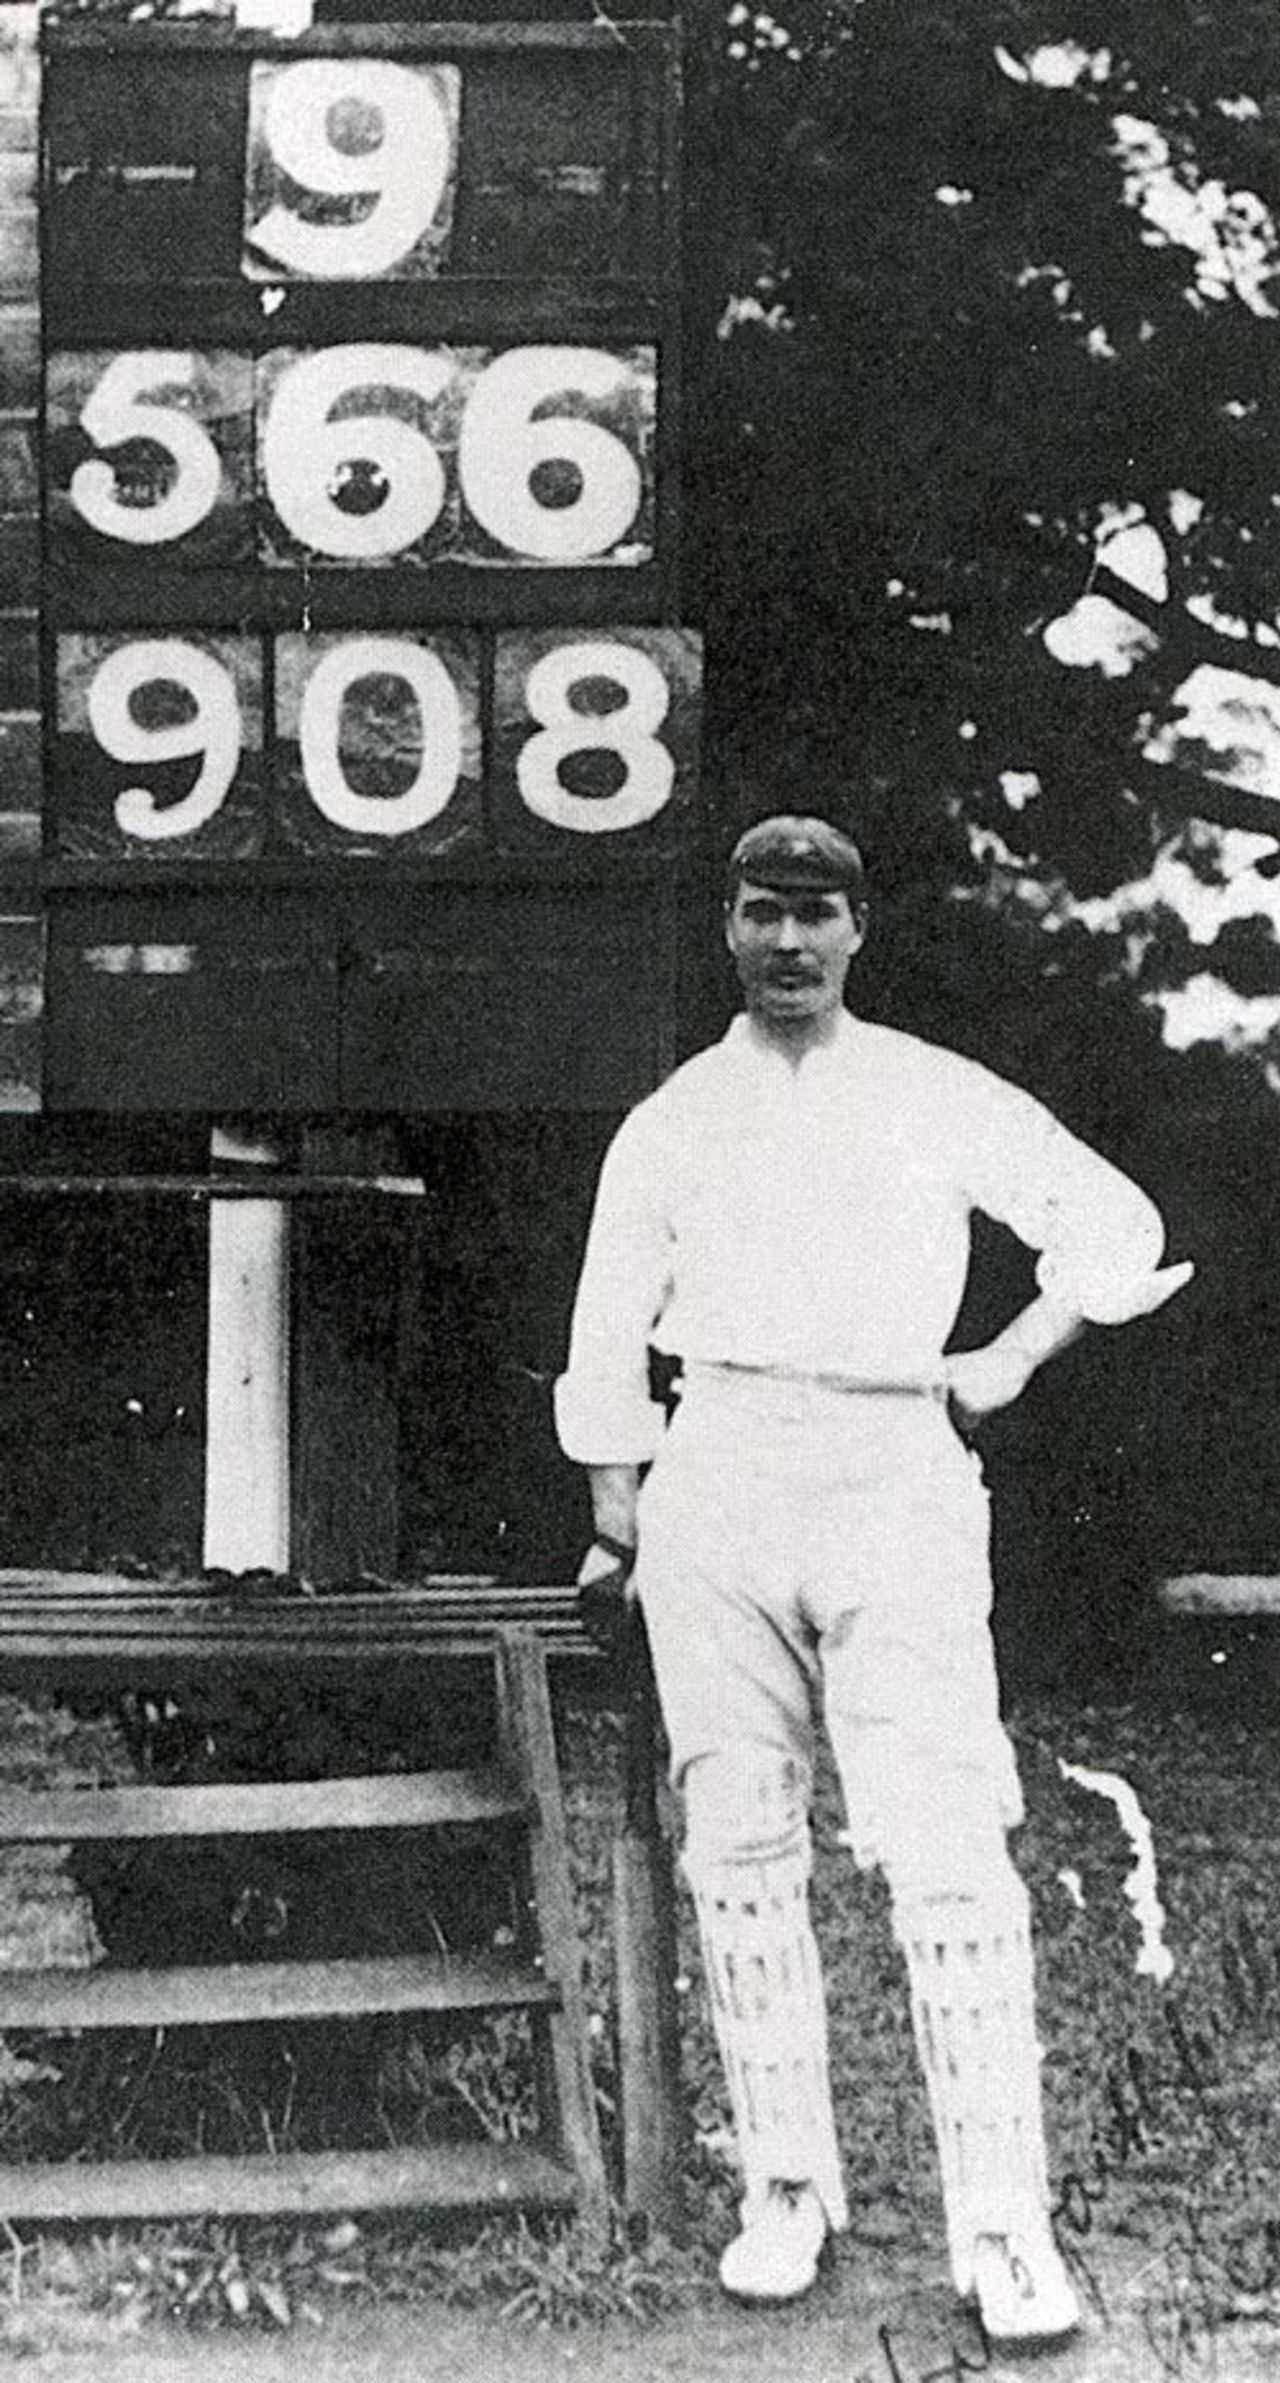 Charles Eady next to the scoreboard after his remarkable innings of 566 in 477 minutes spread over three Saturdays.  The actual team score was 911 but the scorers can be forgiven.  Break-o-Day v Wellington, Hobart, April 5, 1902